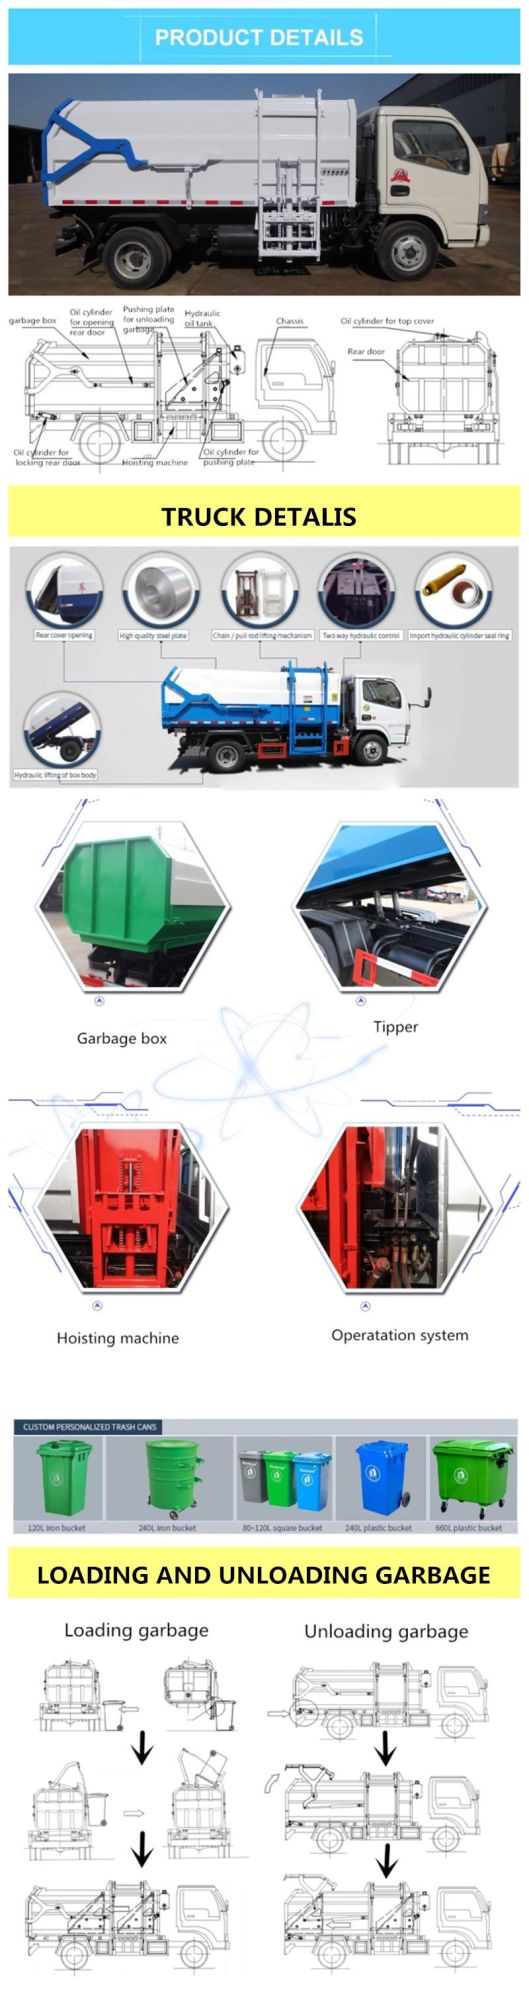 Dongfeng Side Loader 8 M3 Compact Garbage Dump Truck